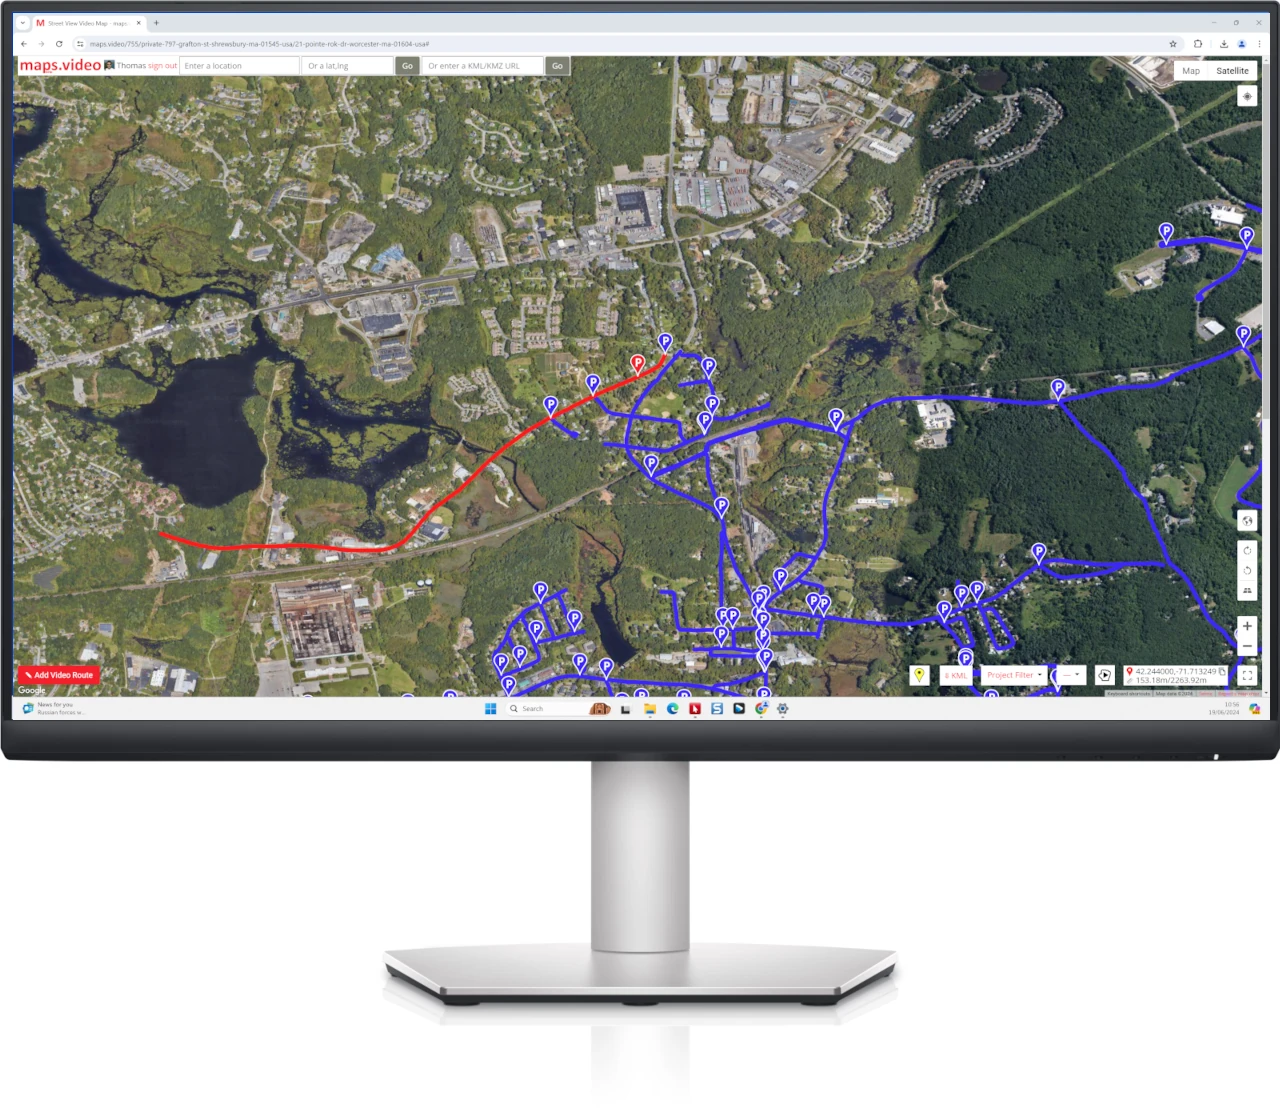 maps.video Windows App screenshot of the map window with Google map of road survey area with video routes lines and markers.